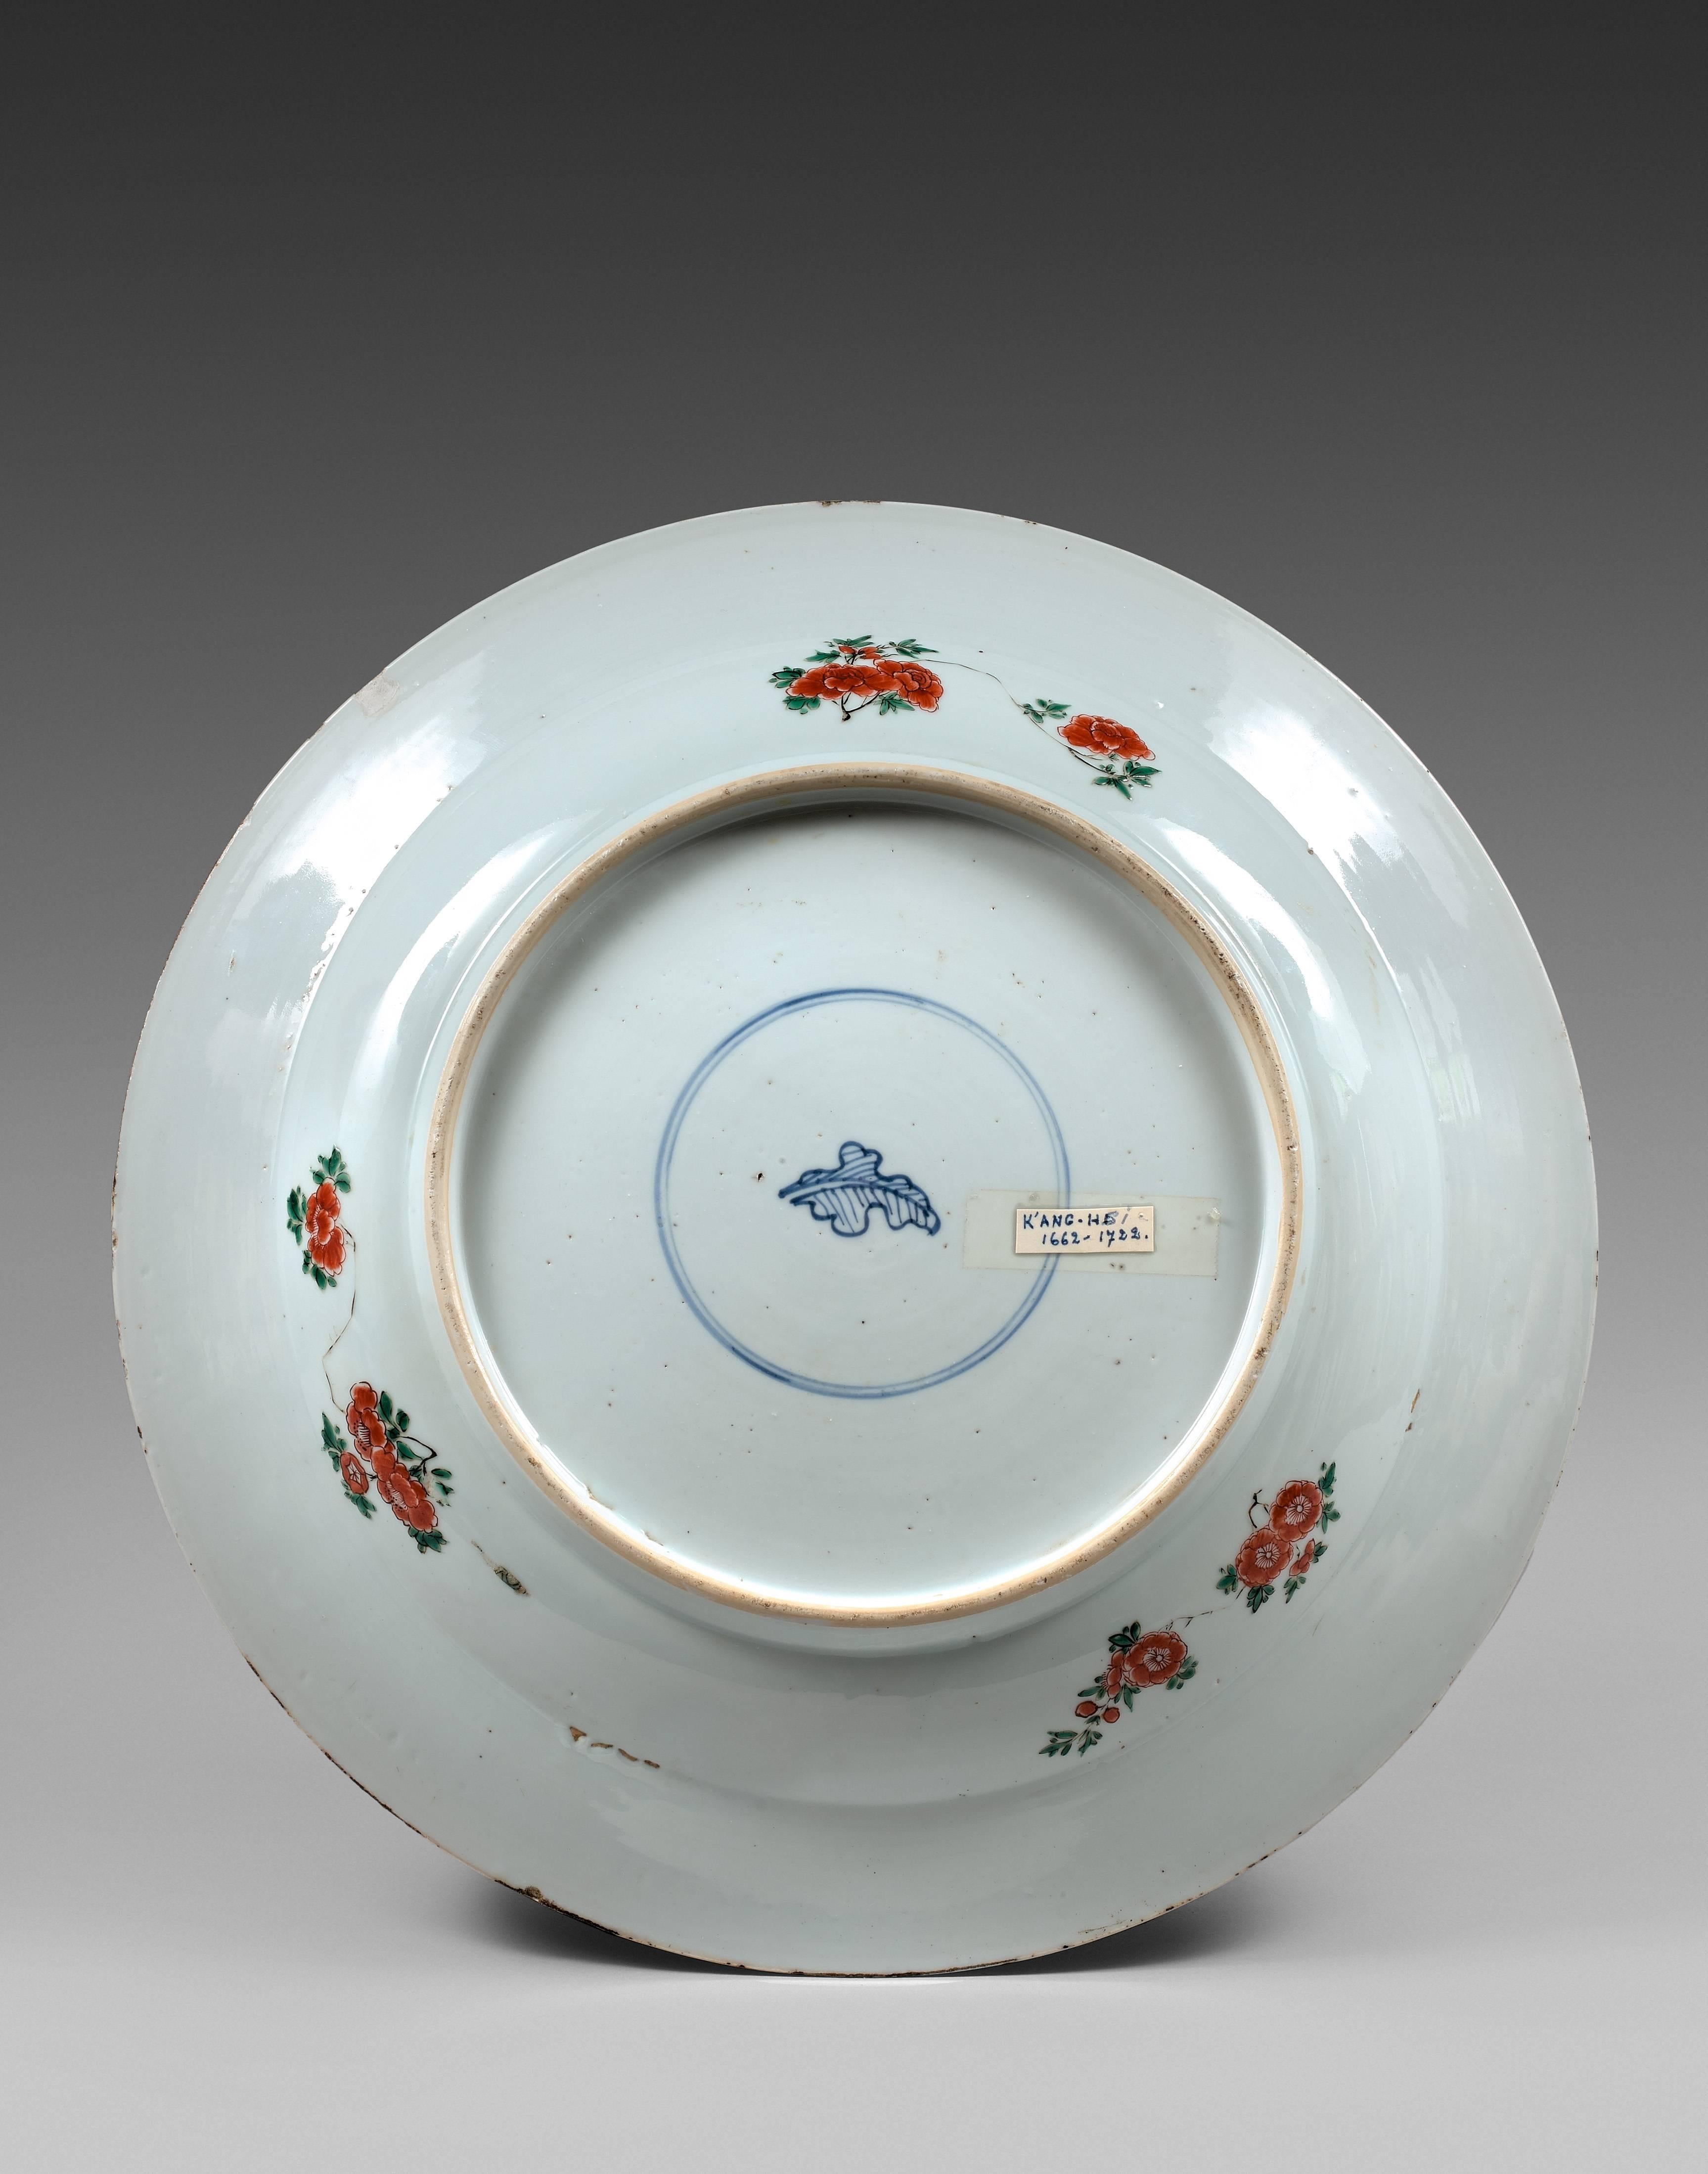 This dish is part of a group a unusual dishes en Famille verte porcelain with the cavetto decorated with flying crane medallions on a red wickerwork ground. The center of the dish depicts a scene of the book 6 of 